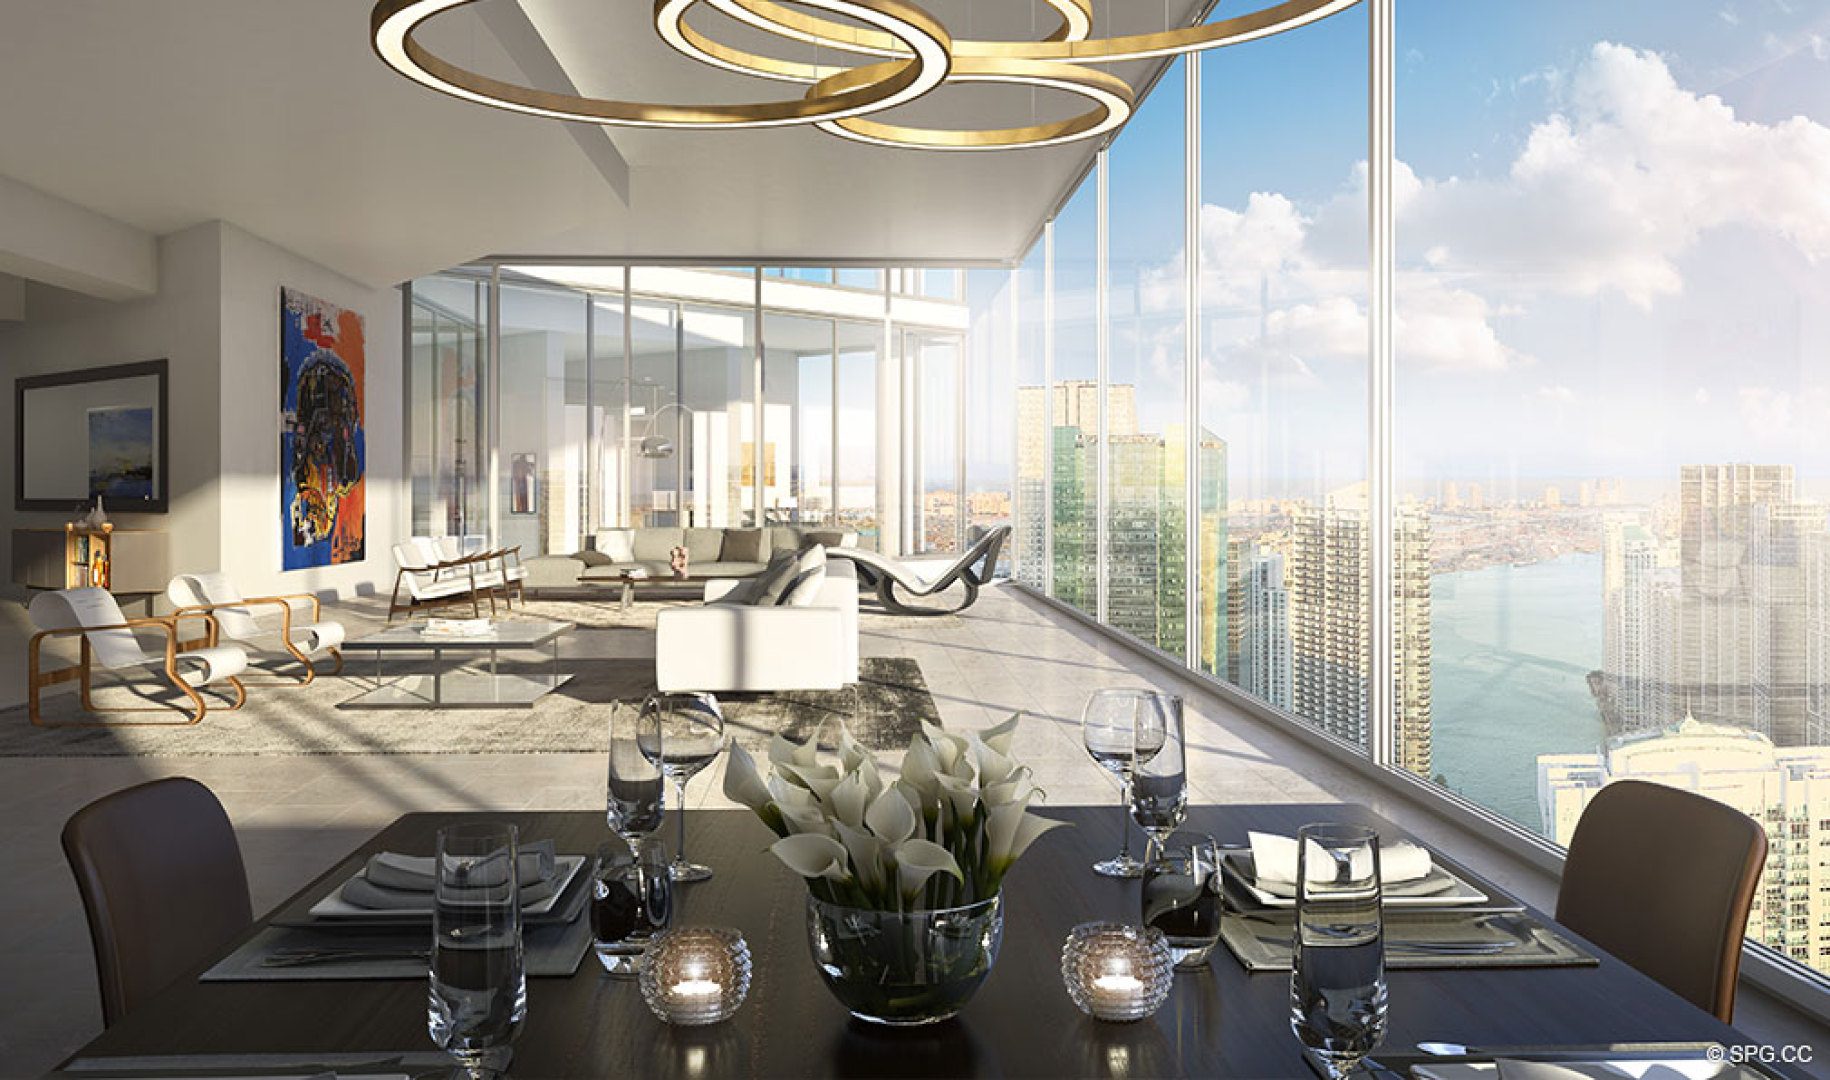 Residence Design at One River Point, Luxury Waterfront Condos in Miami, Florida 33130